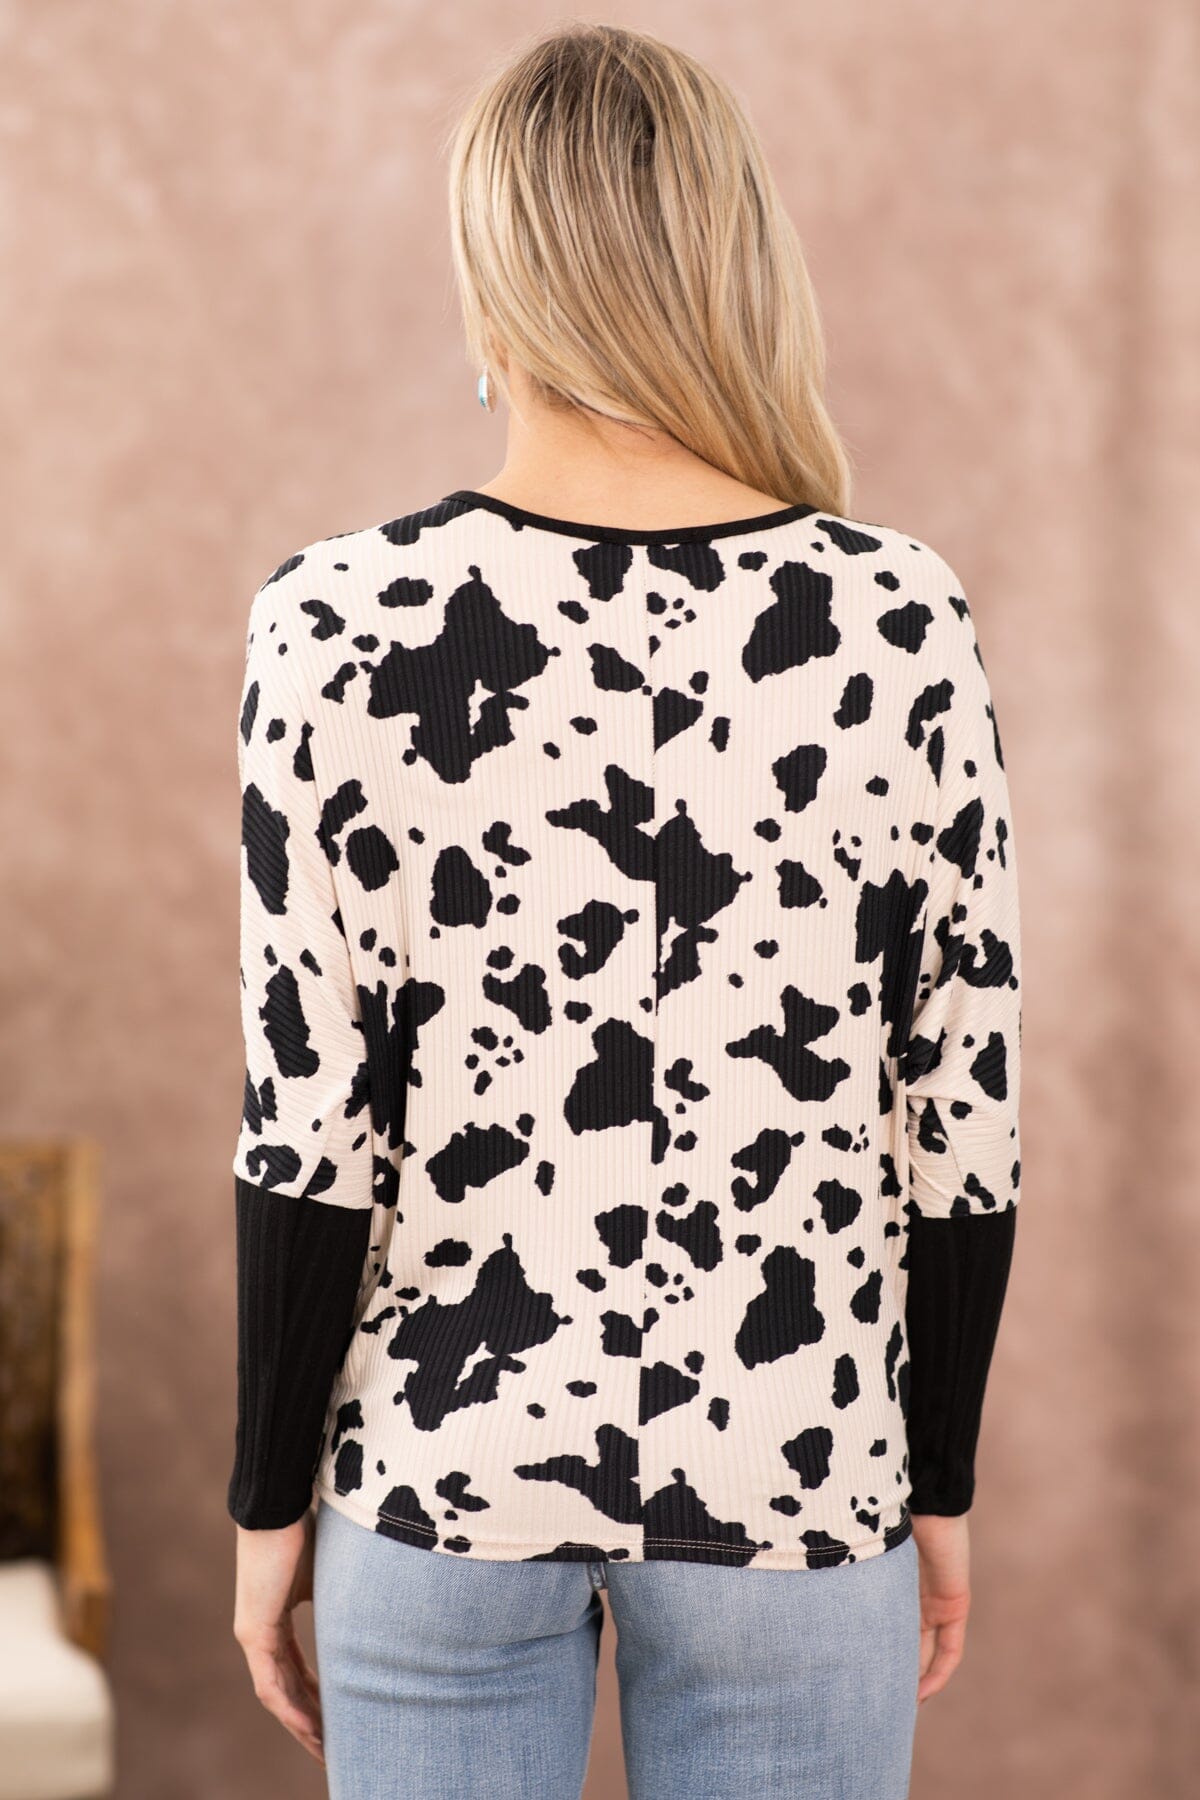 Black and Cream Cow Print Top - Filly Flair